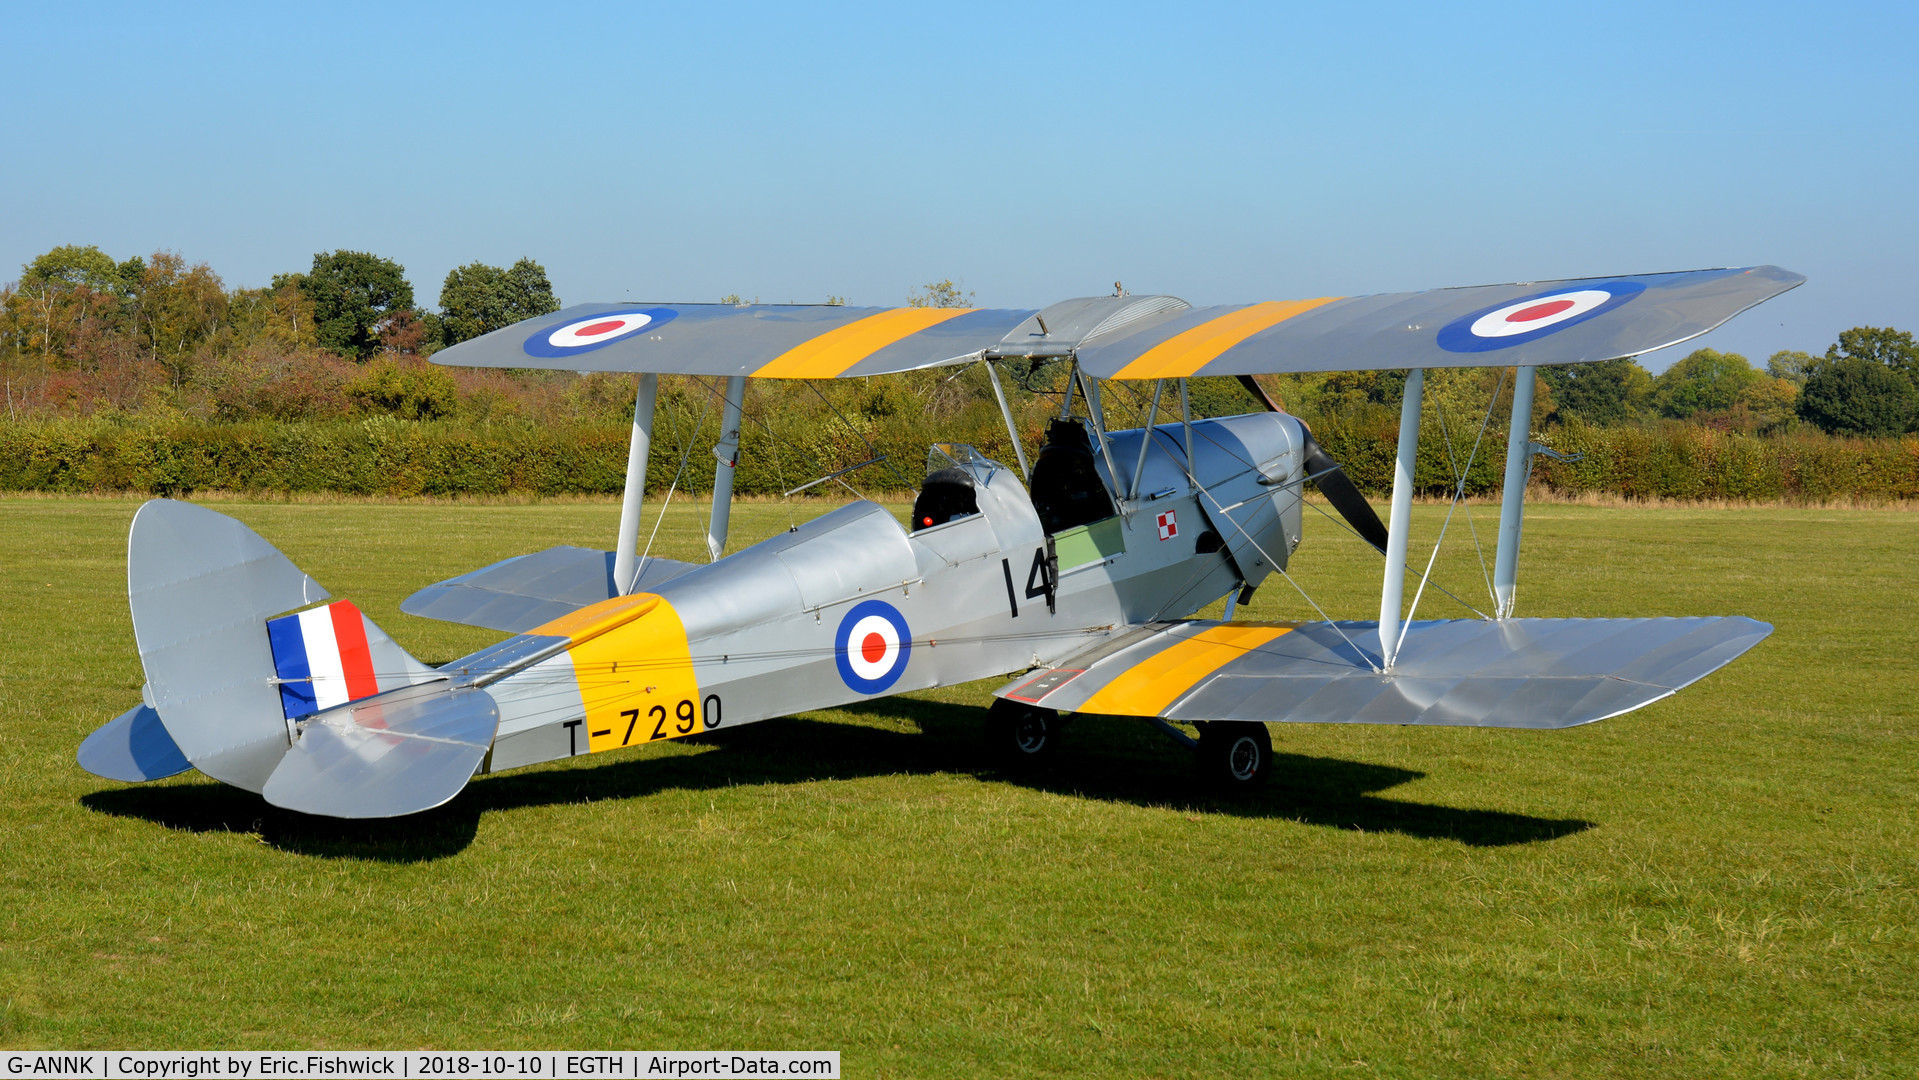 G-ANNK, 1940 De Havilland DH-82A Tiger Moth II C/N 83804, 2. T-7290 (with the Polish Squadron insignia) at The Shuttleworth Collection, Oct. 2018.